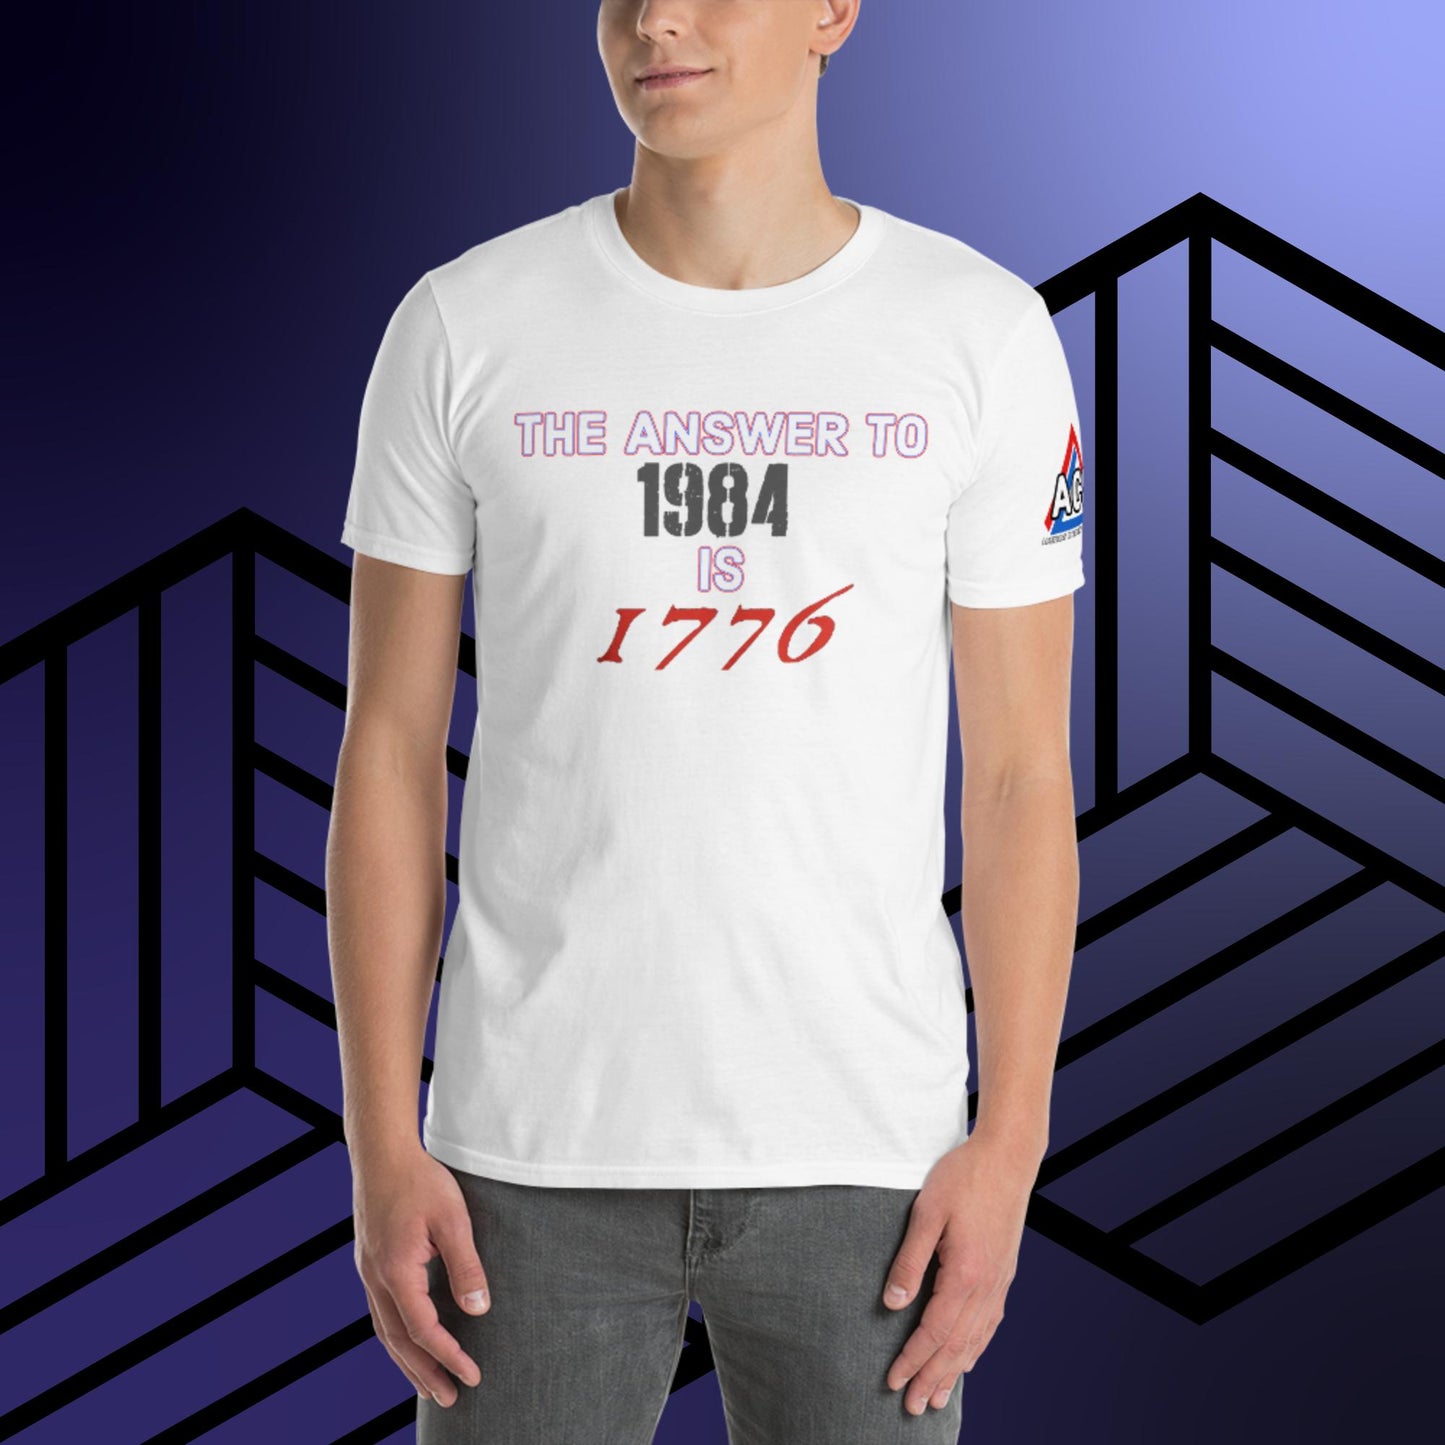 ACS The Answer To 1984 Is 1776